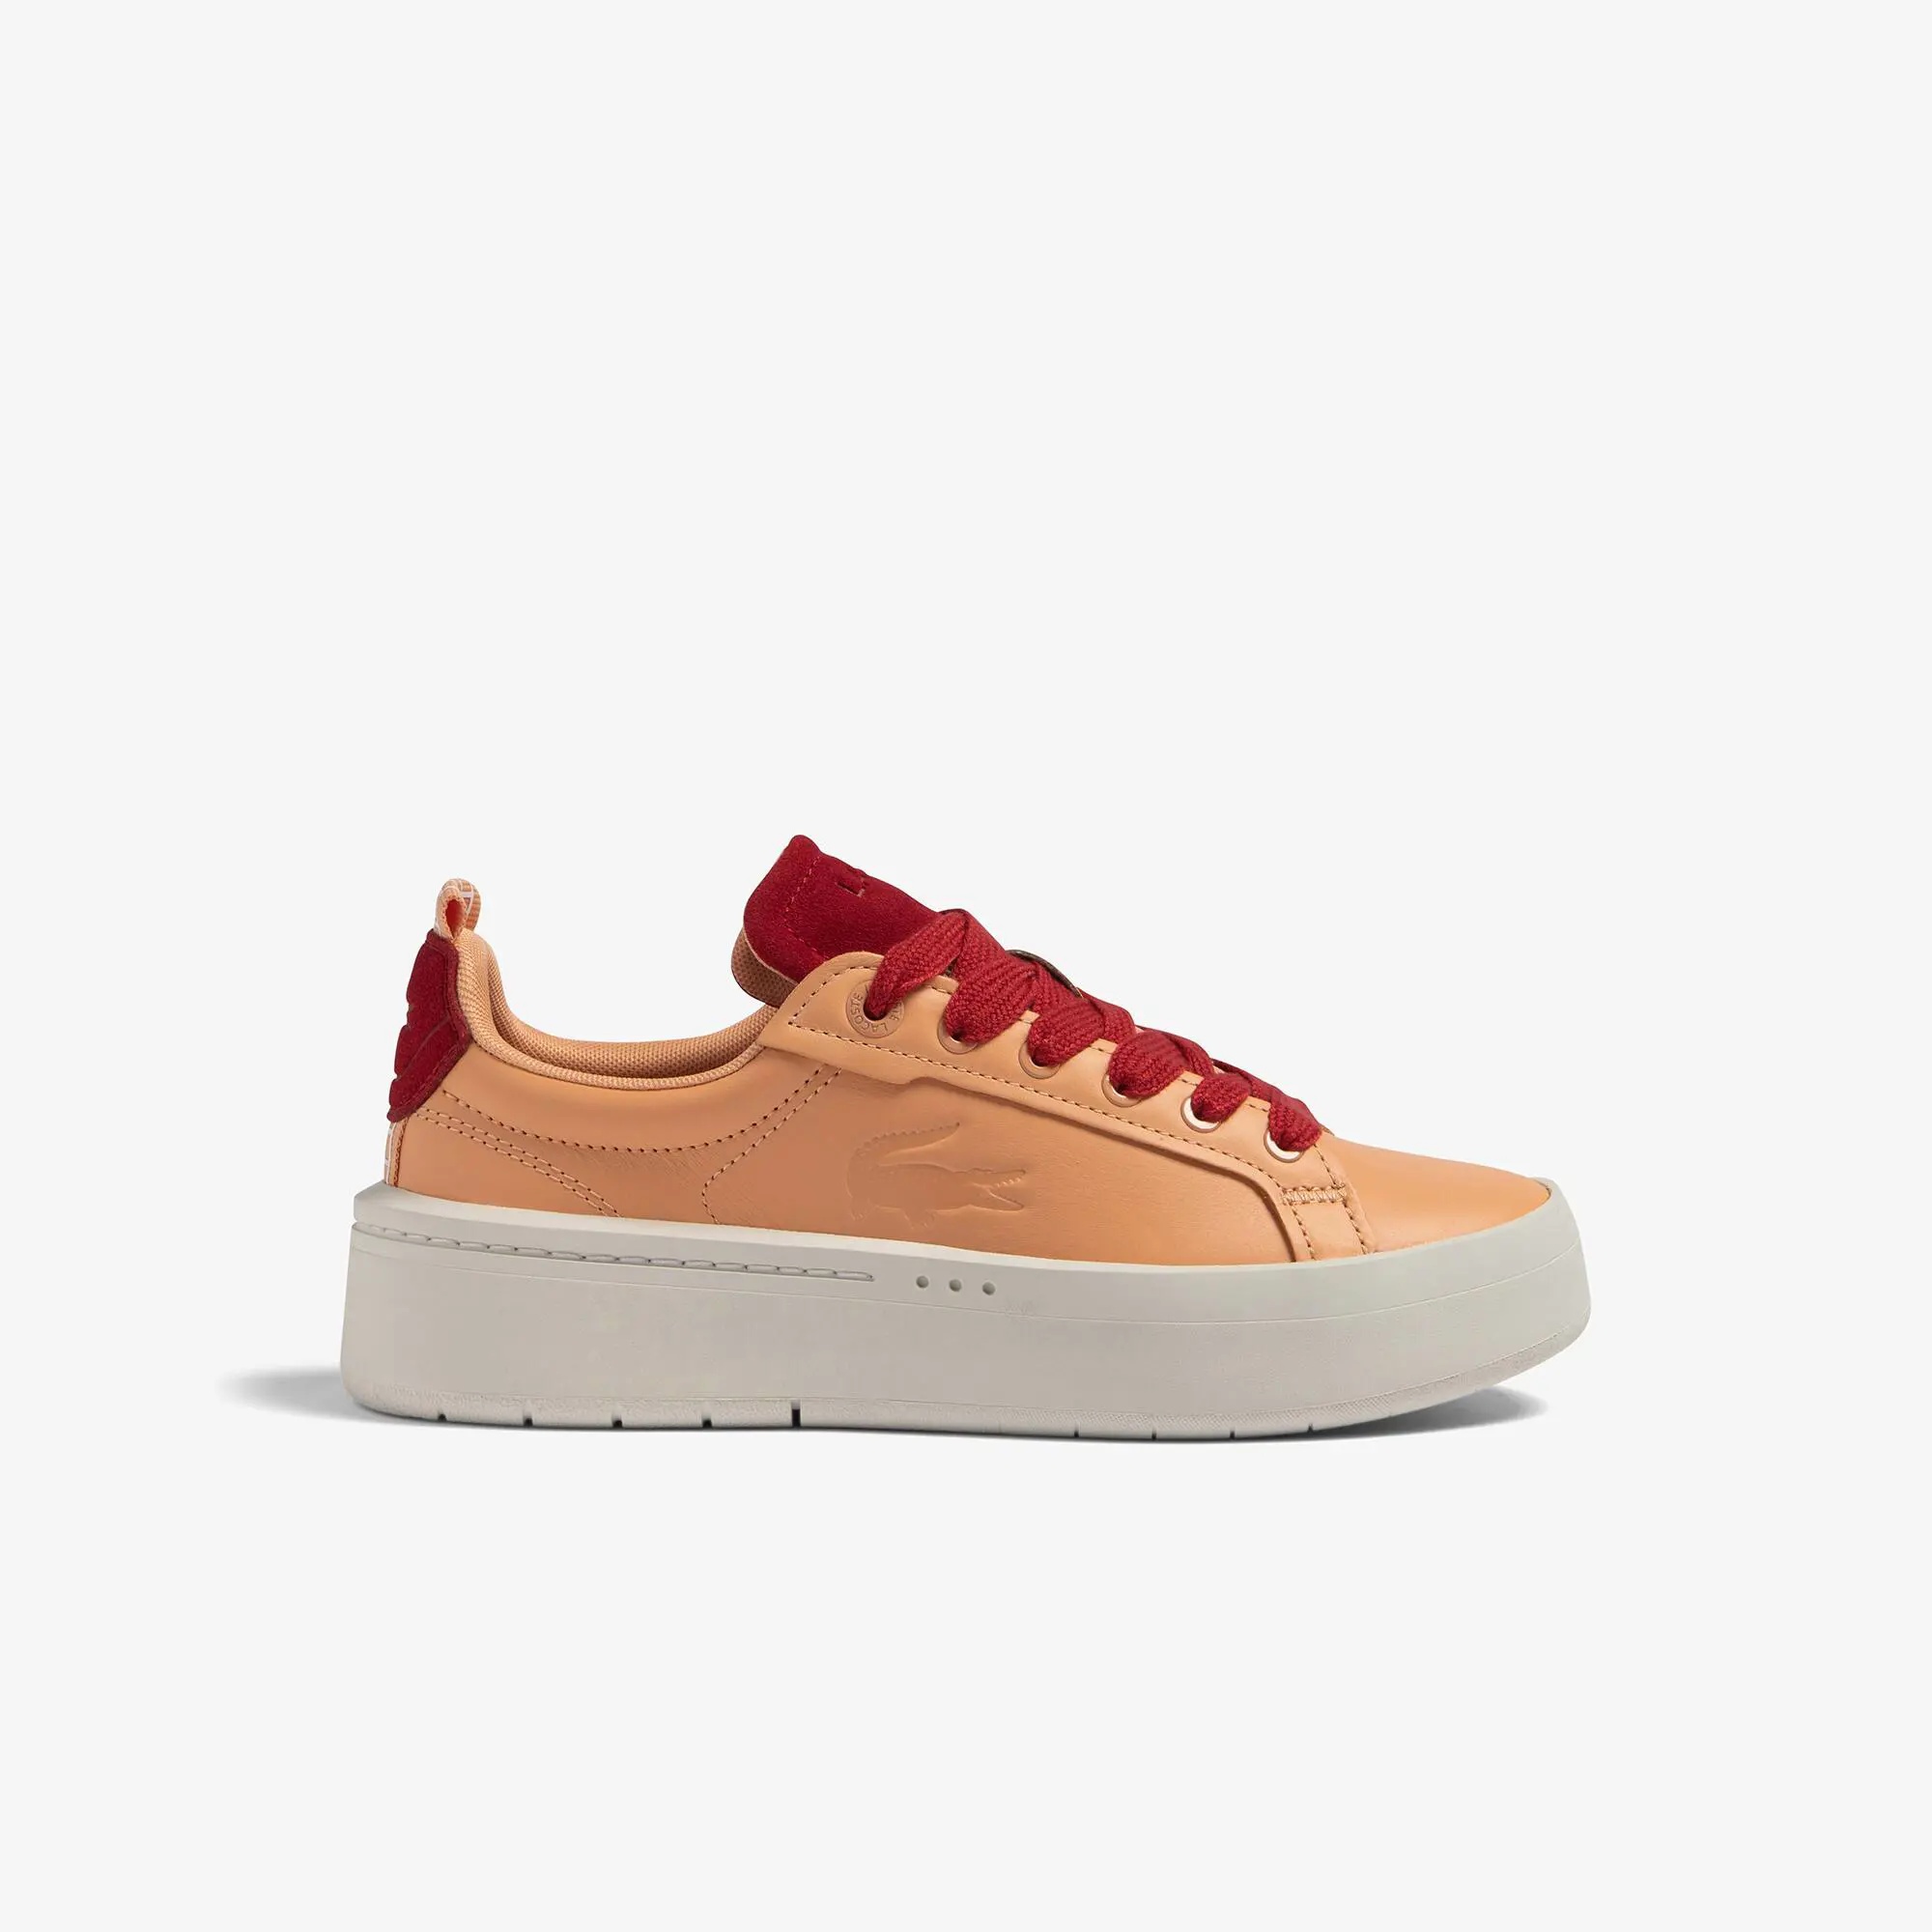 Lacoste Women's Lacoste Carnaby Platform Leather Trainers. 1